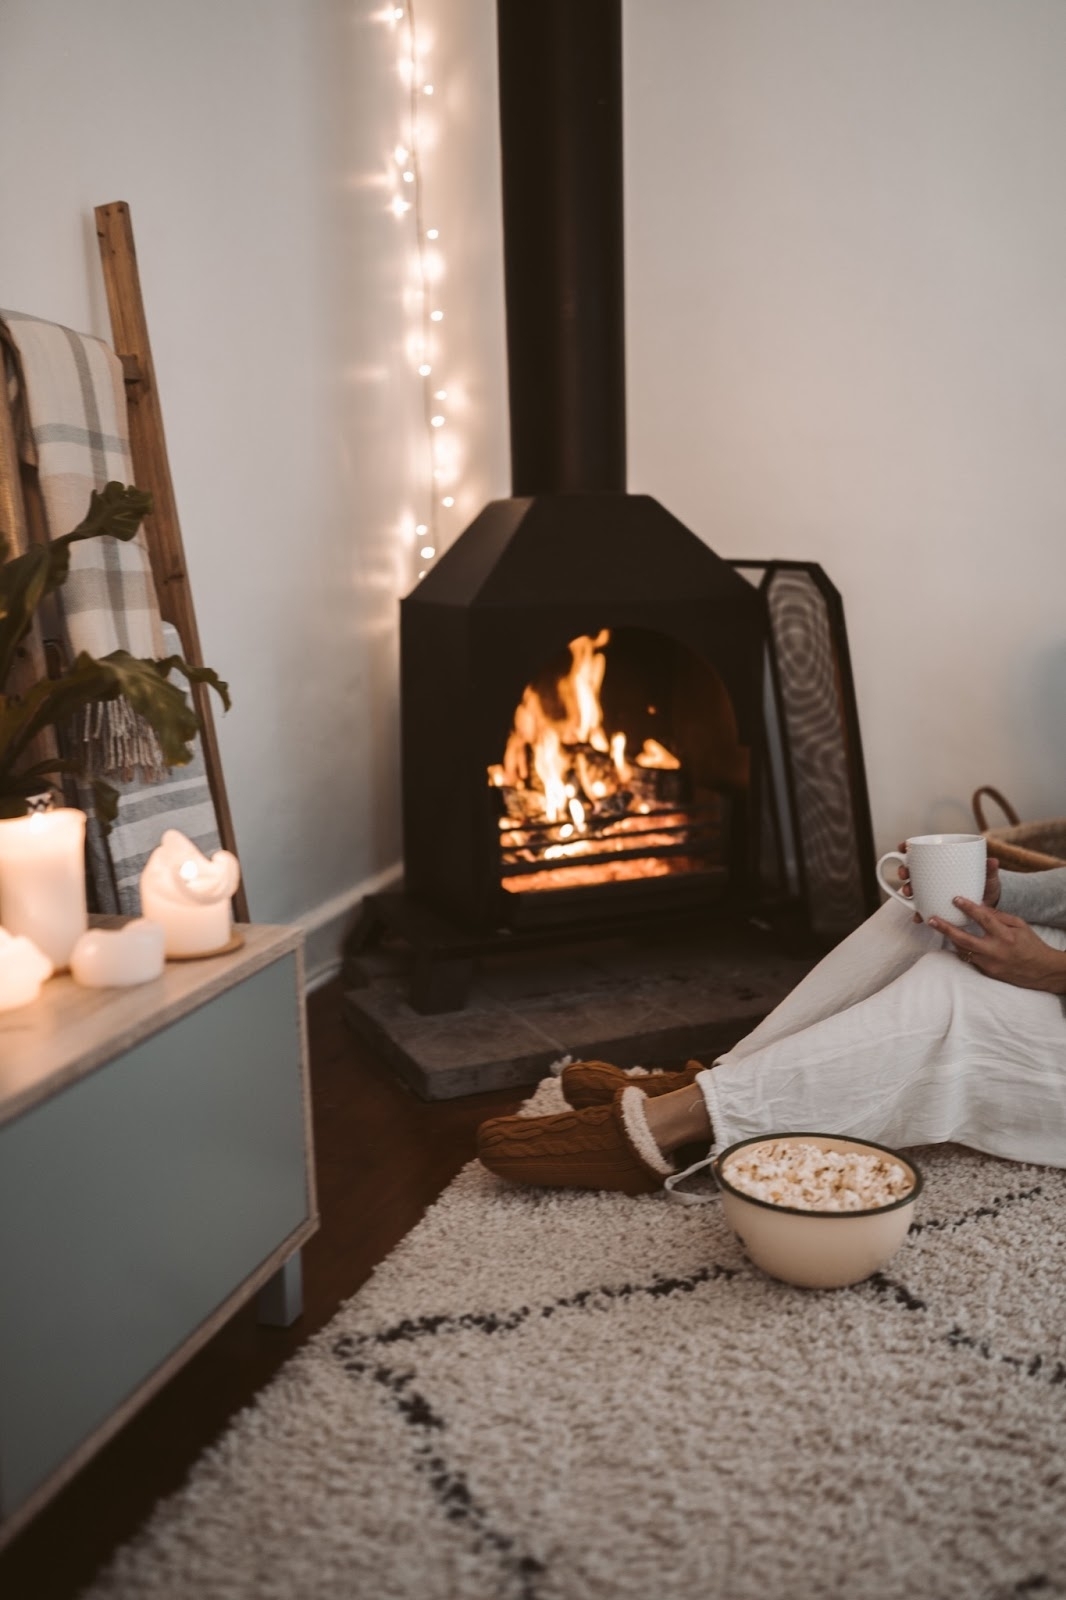 How Can You Incorporate Hygge Into Your Interior Design?